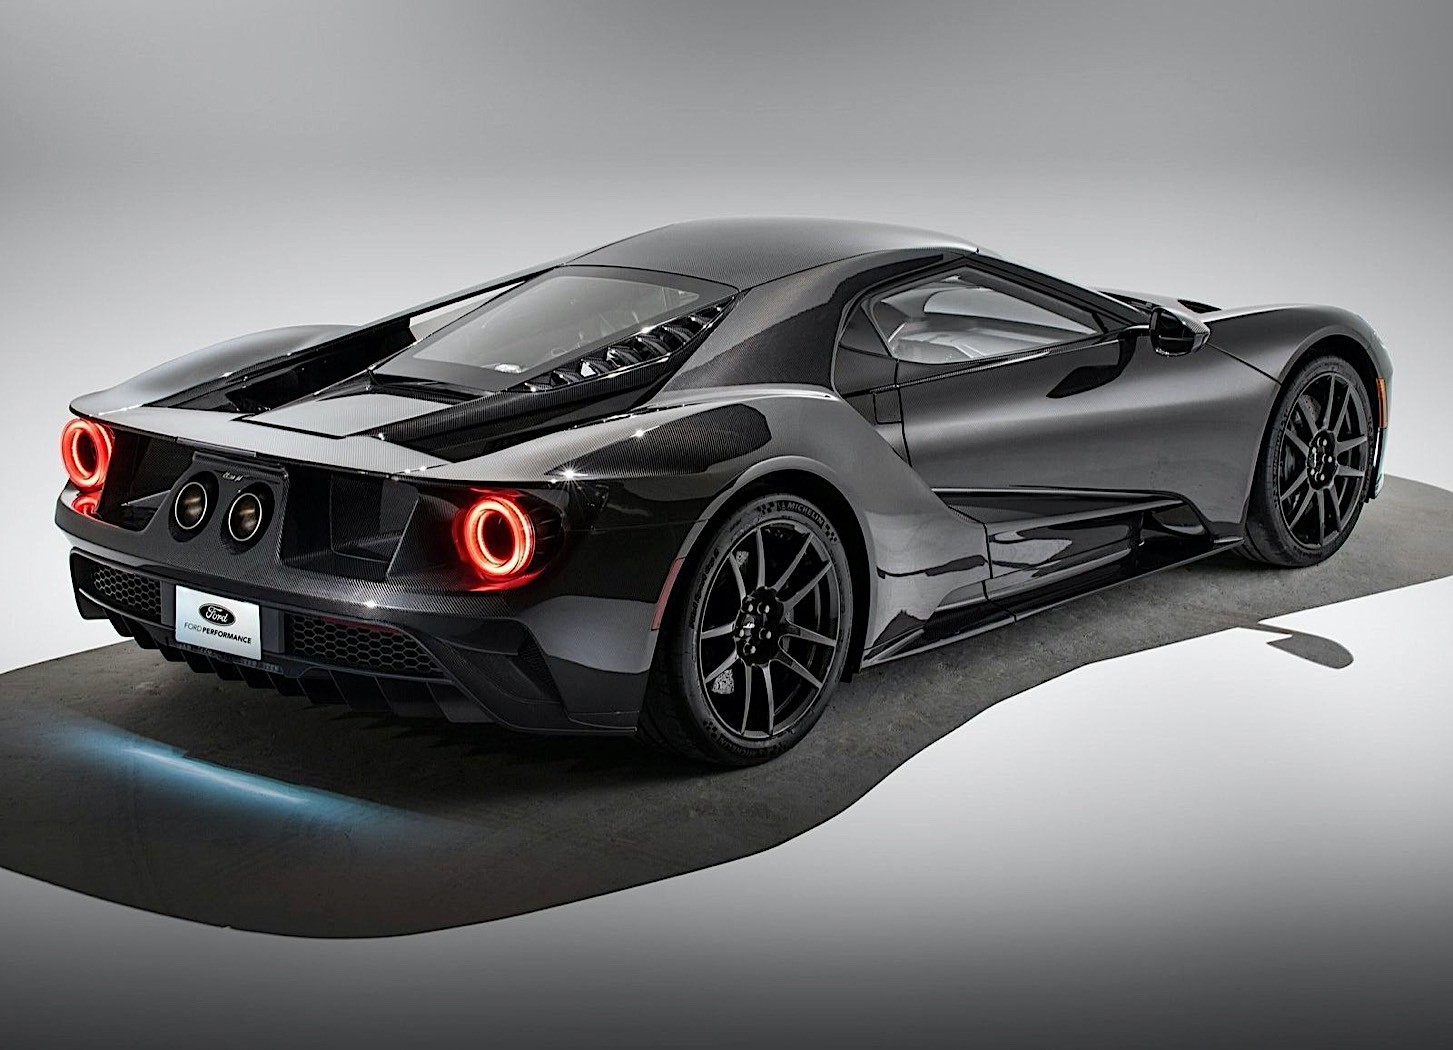 Best Of 99 Ford Gt 2020 Price